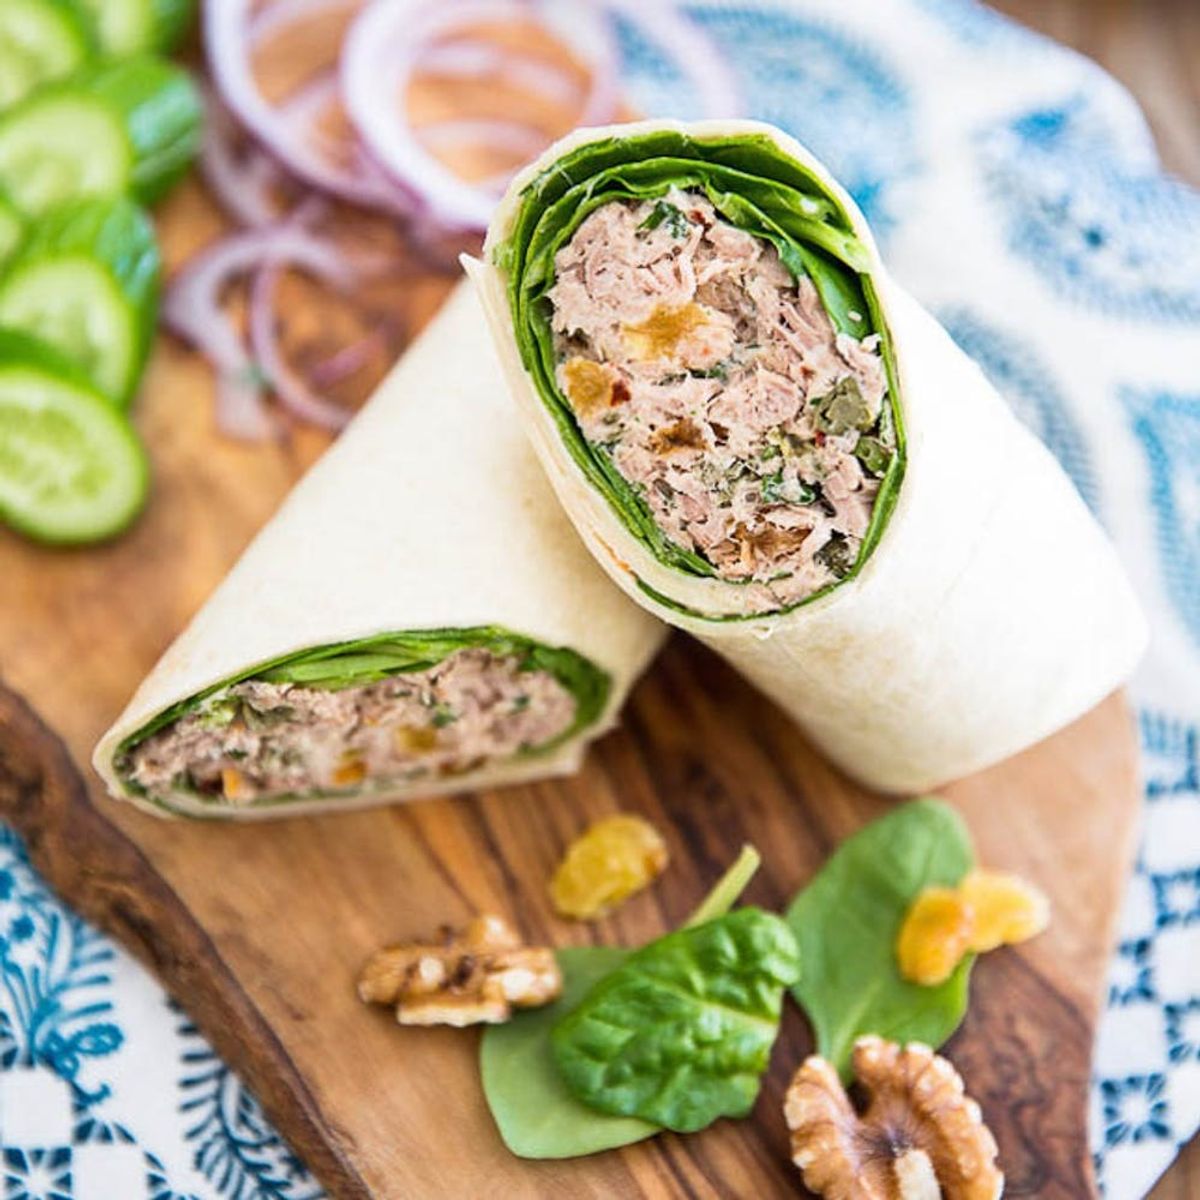 A healthy wrap filled with chicken salad on a wood cutting board with spinach and walnuts.